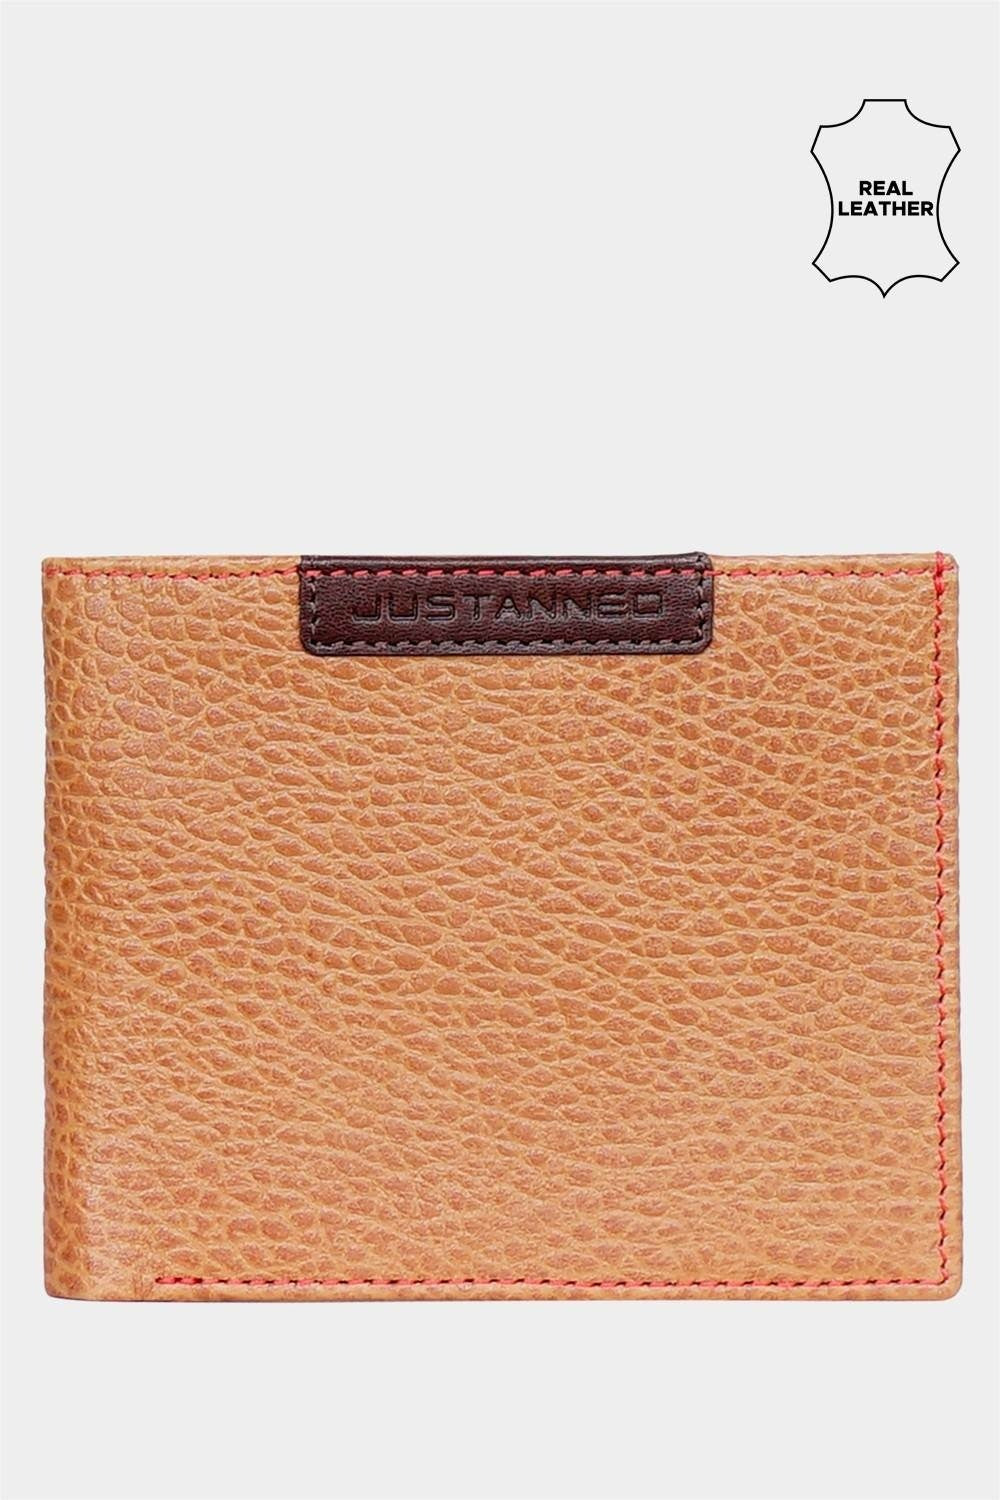 Justanned Top Patch Detailed Men Wallet